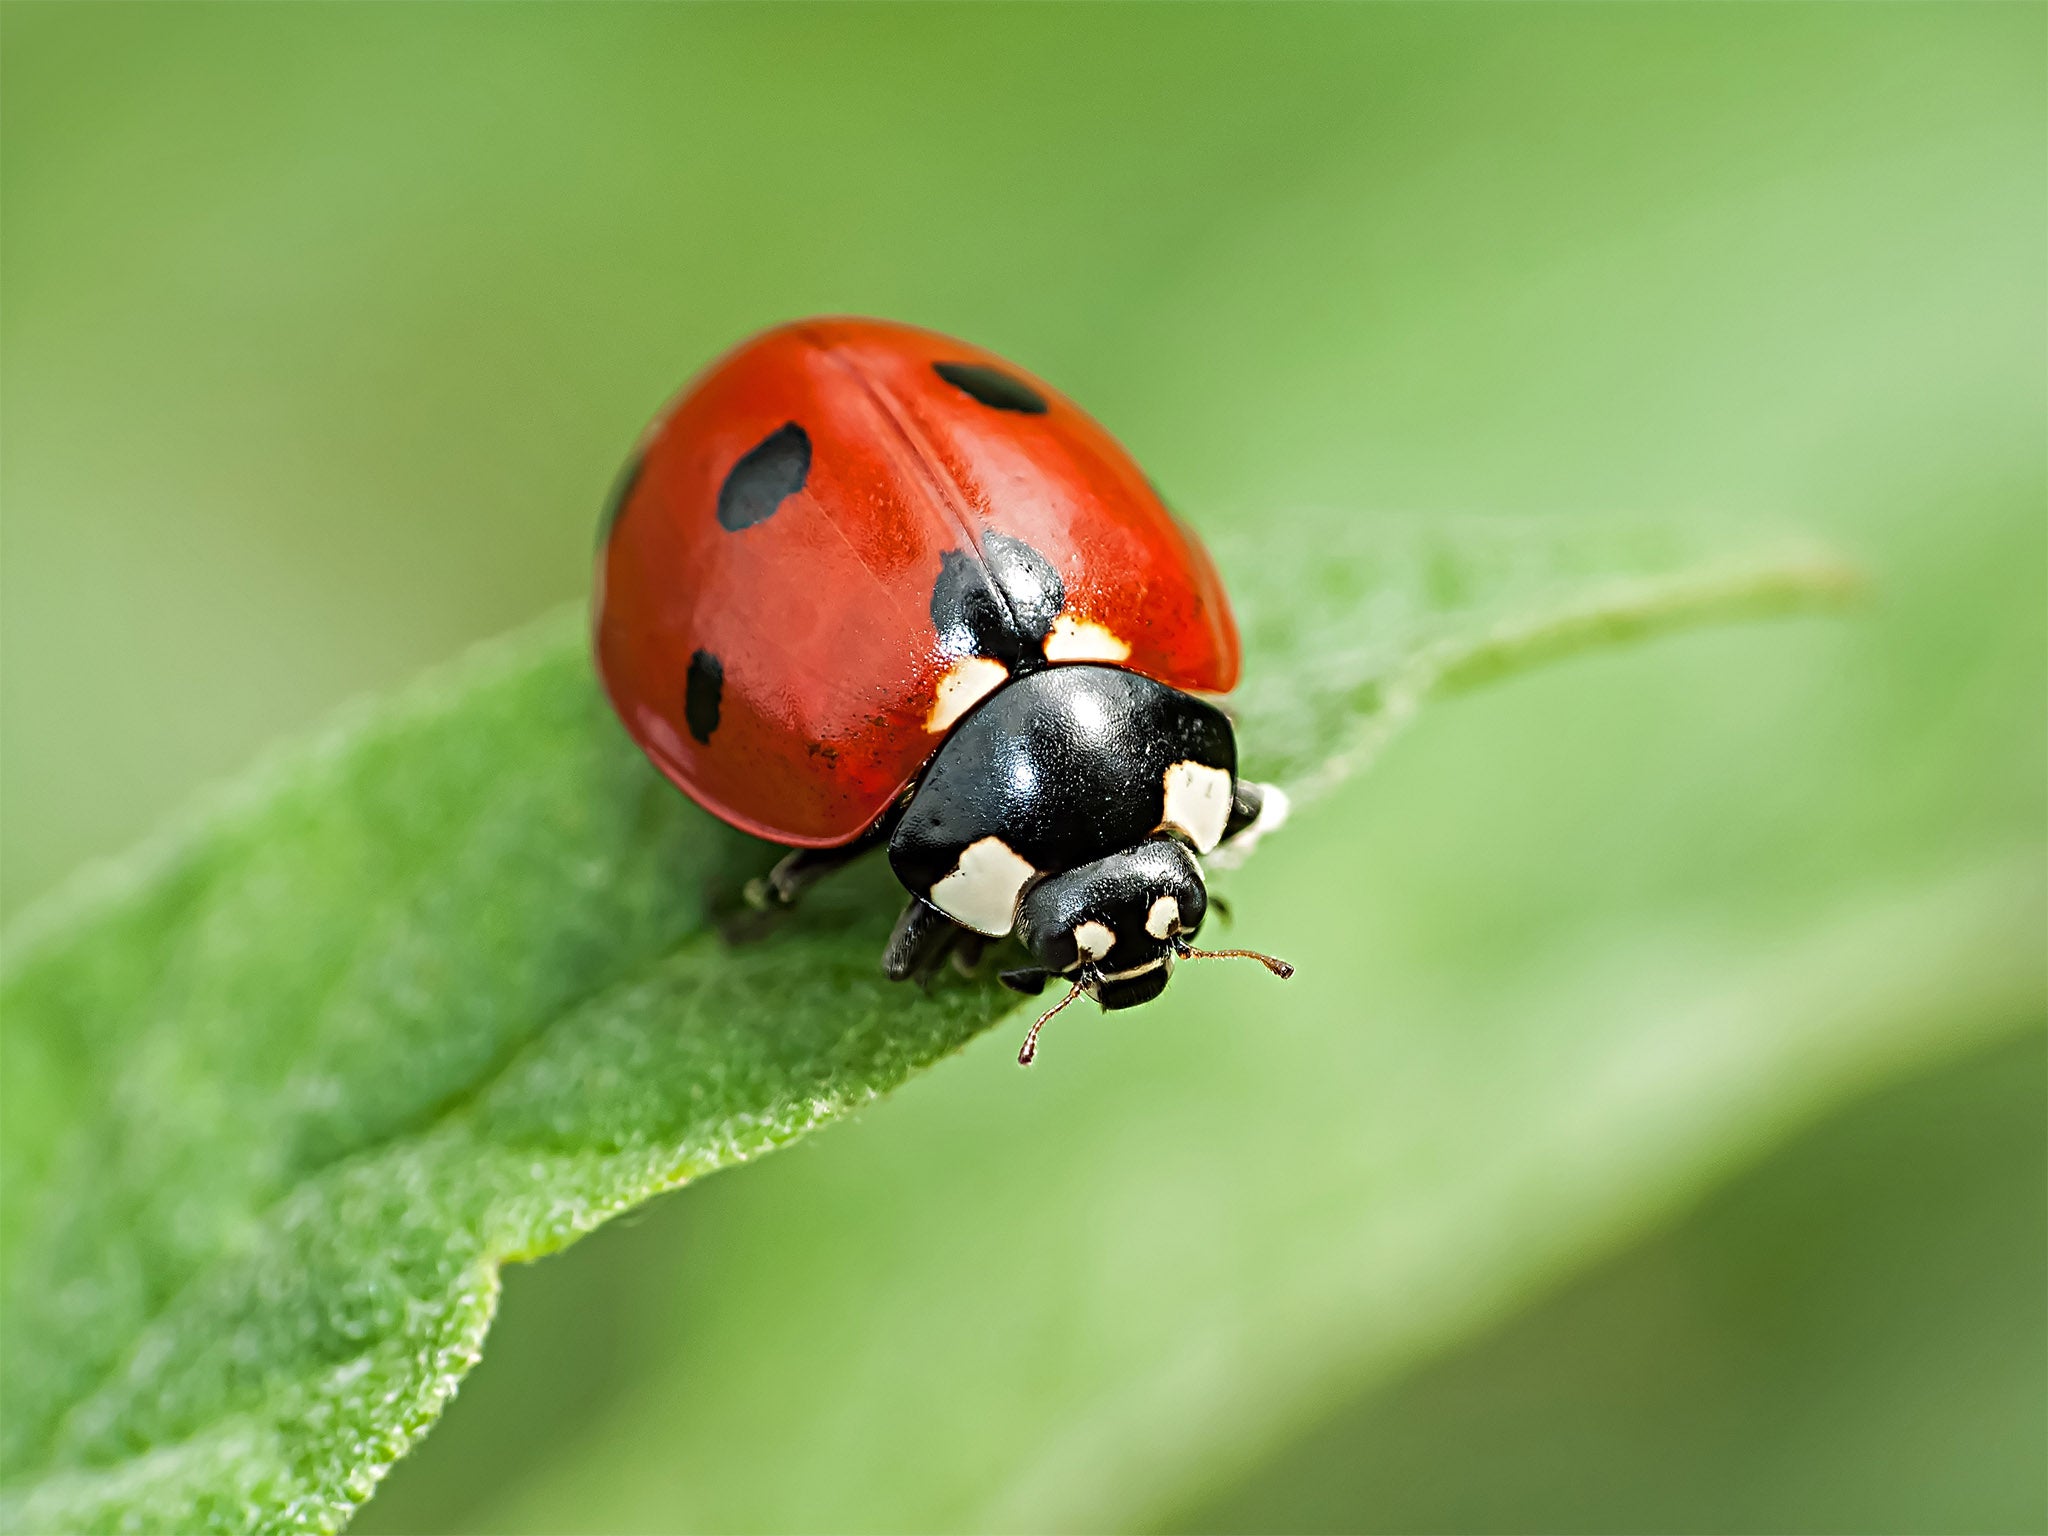 Ladybirds are one of the best defences against aphids